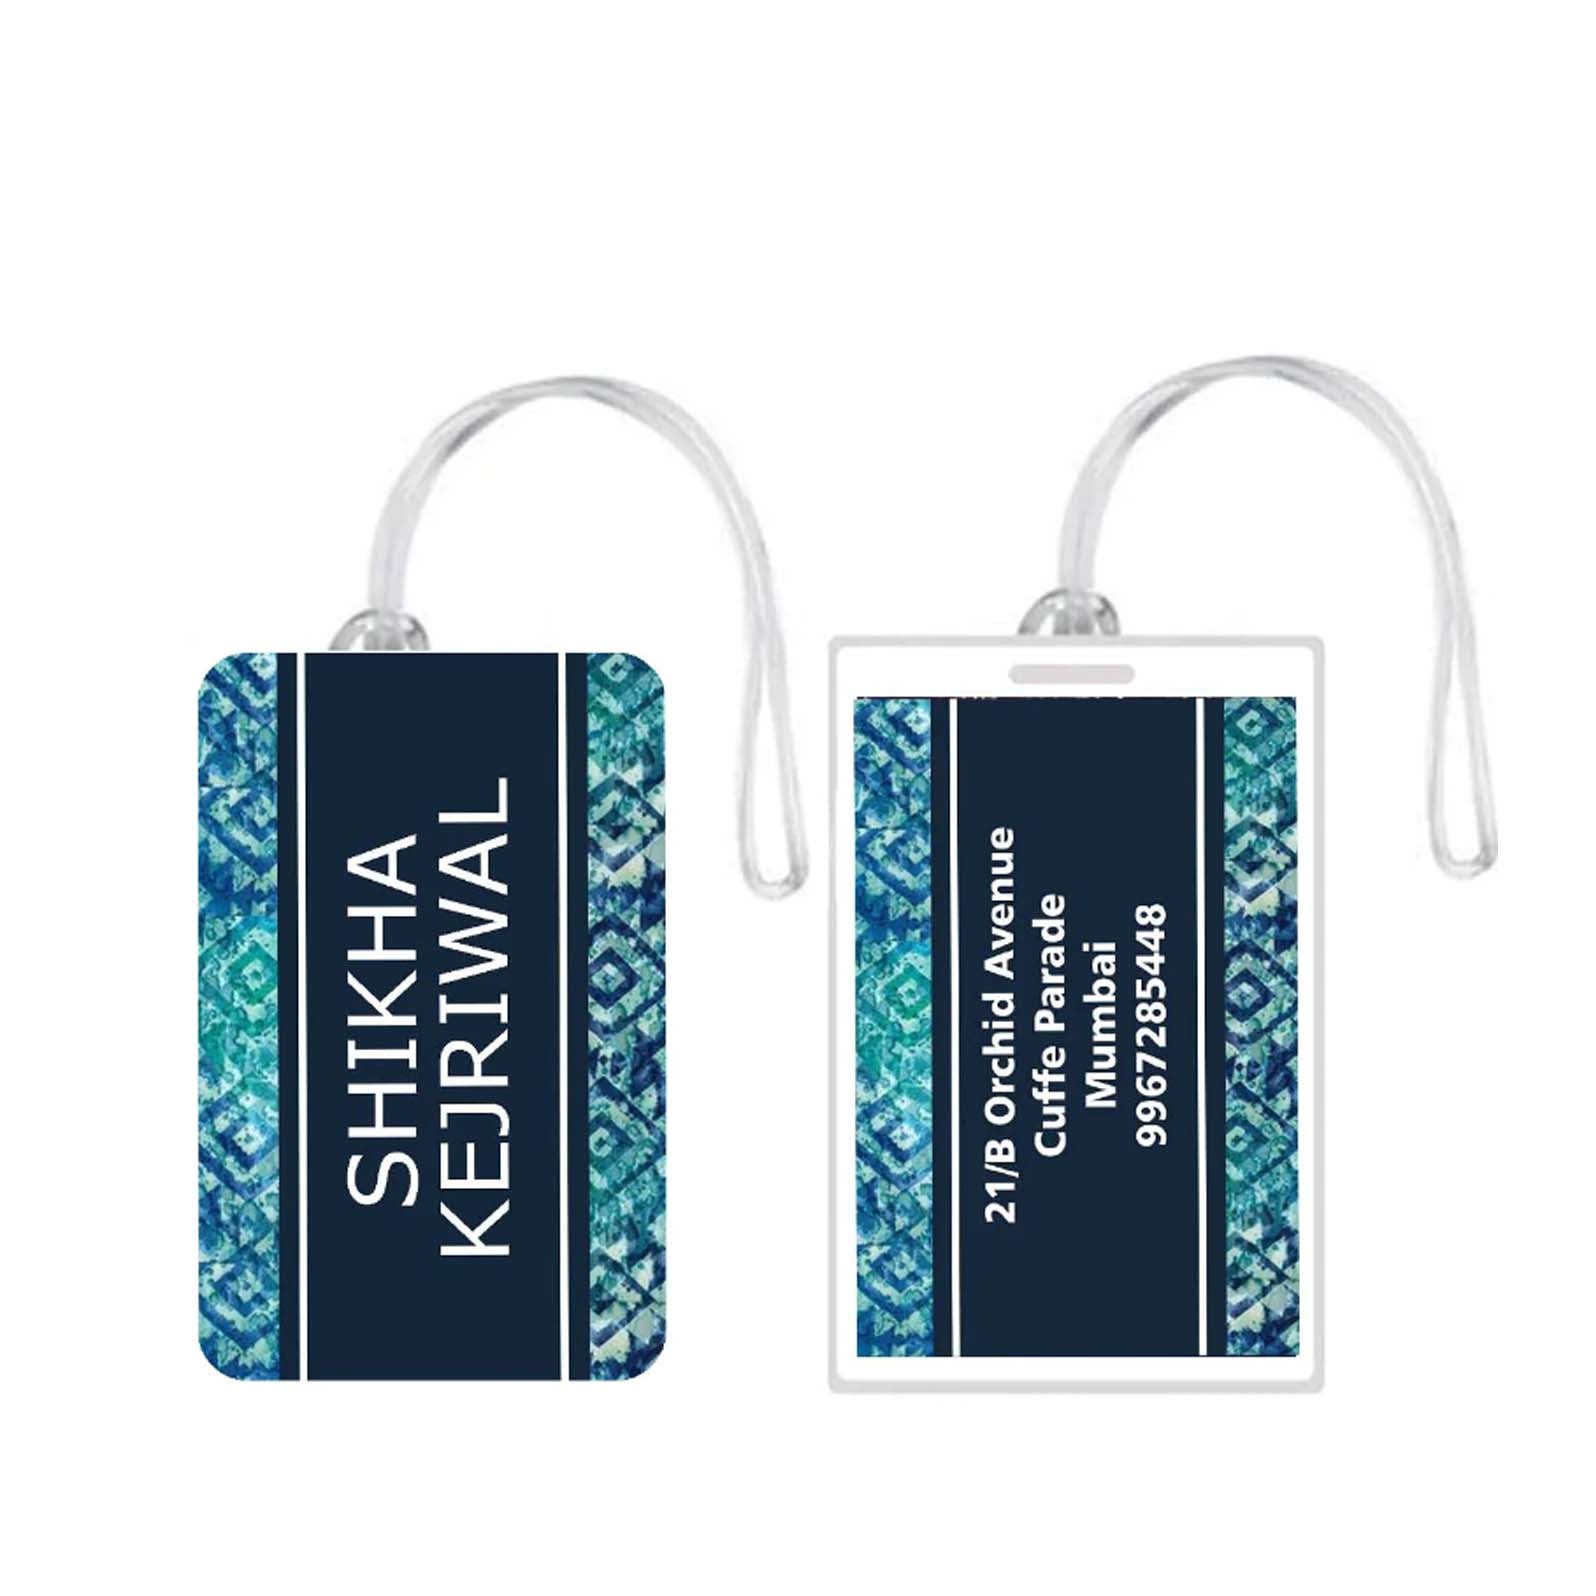 Personalized Luggage Tags Batik Design - Set of 5 Chatterbox Labels